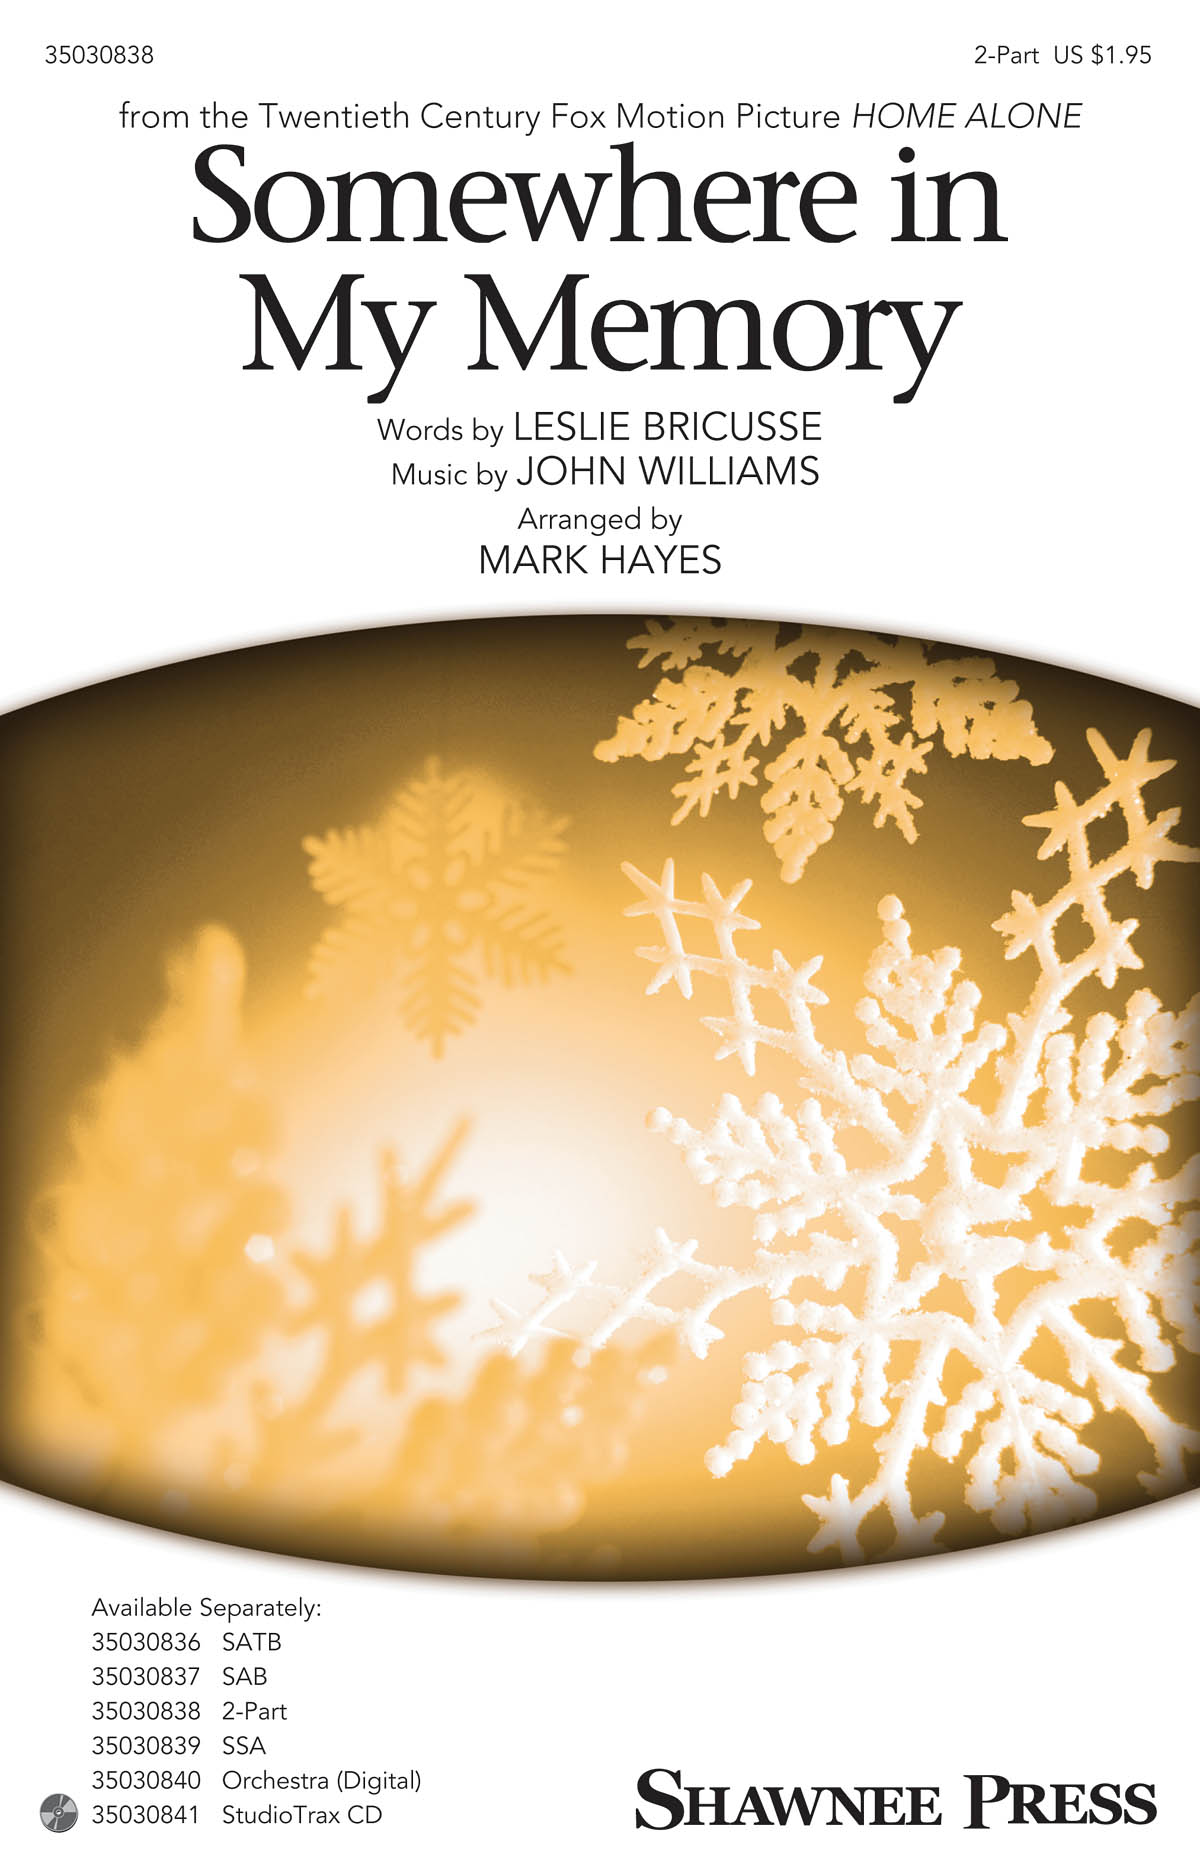 Mark Hayes: Somewhere in My Memory (2-Part)